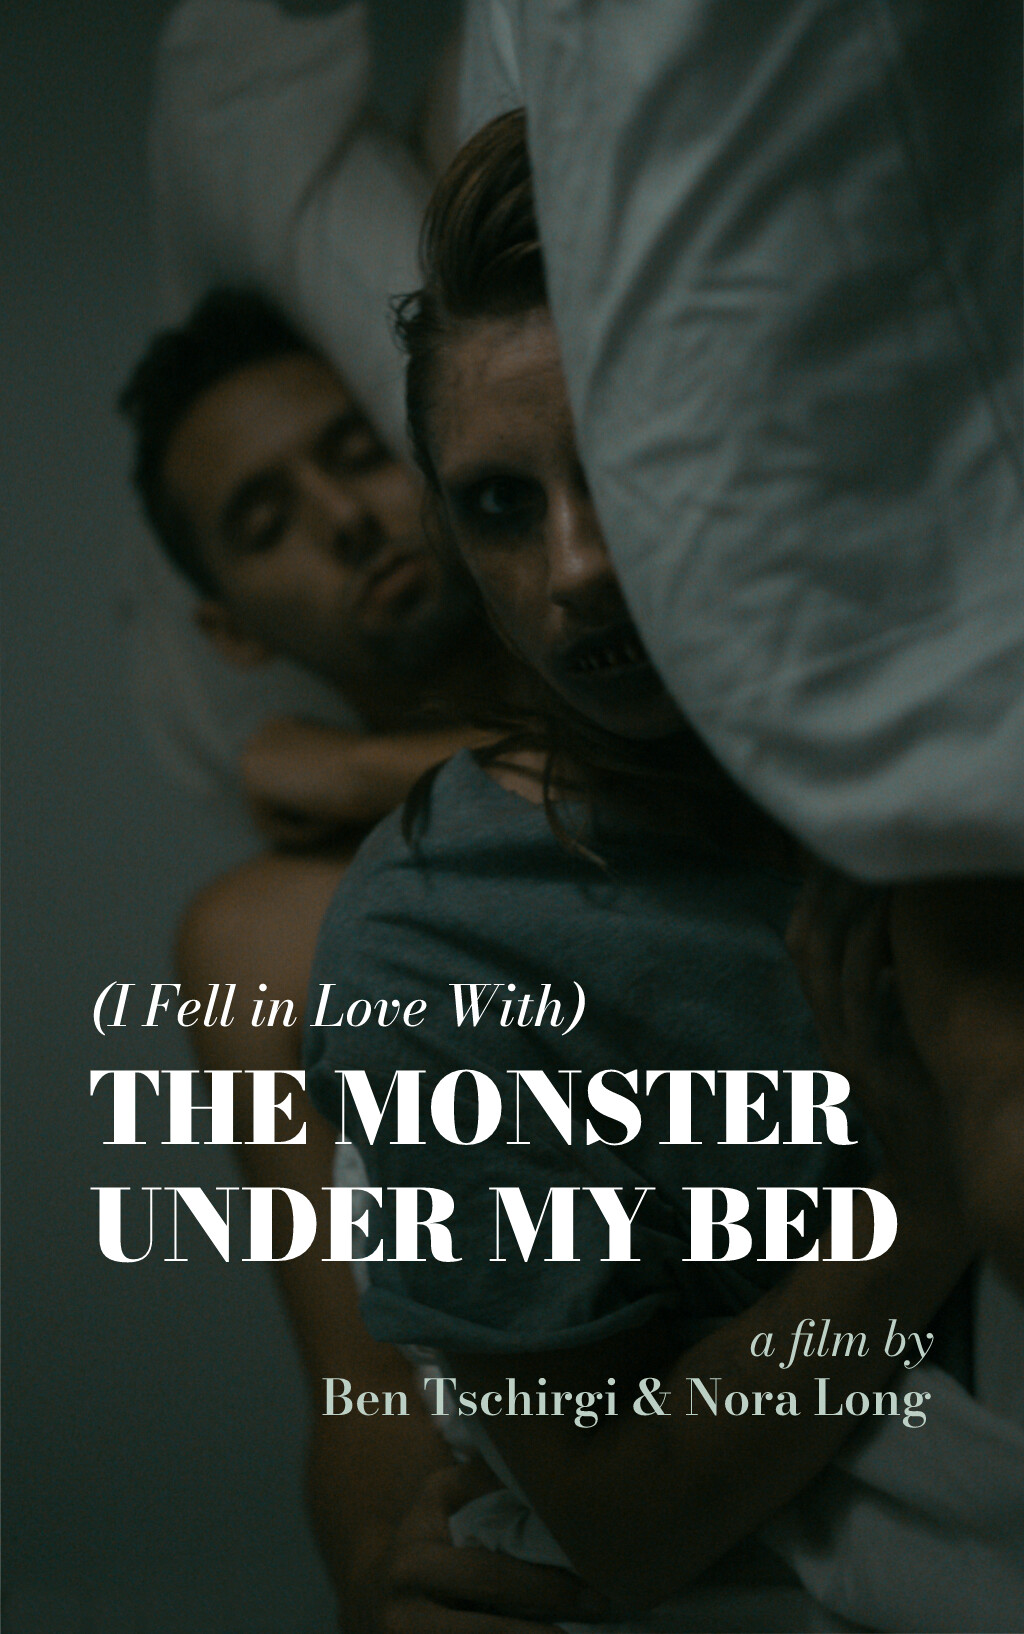 Filmposter for (I Fell in Love With) The Monster Under My Bed